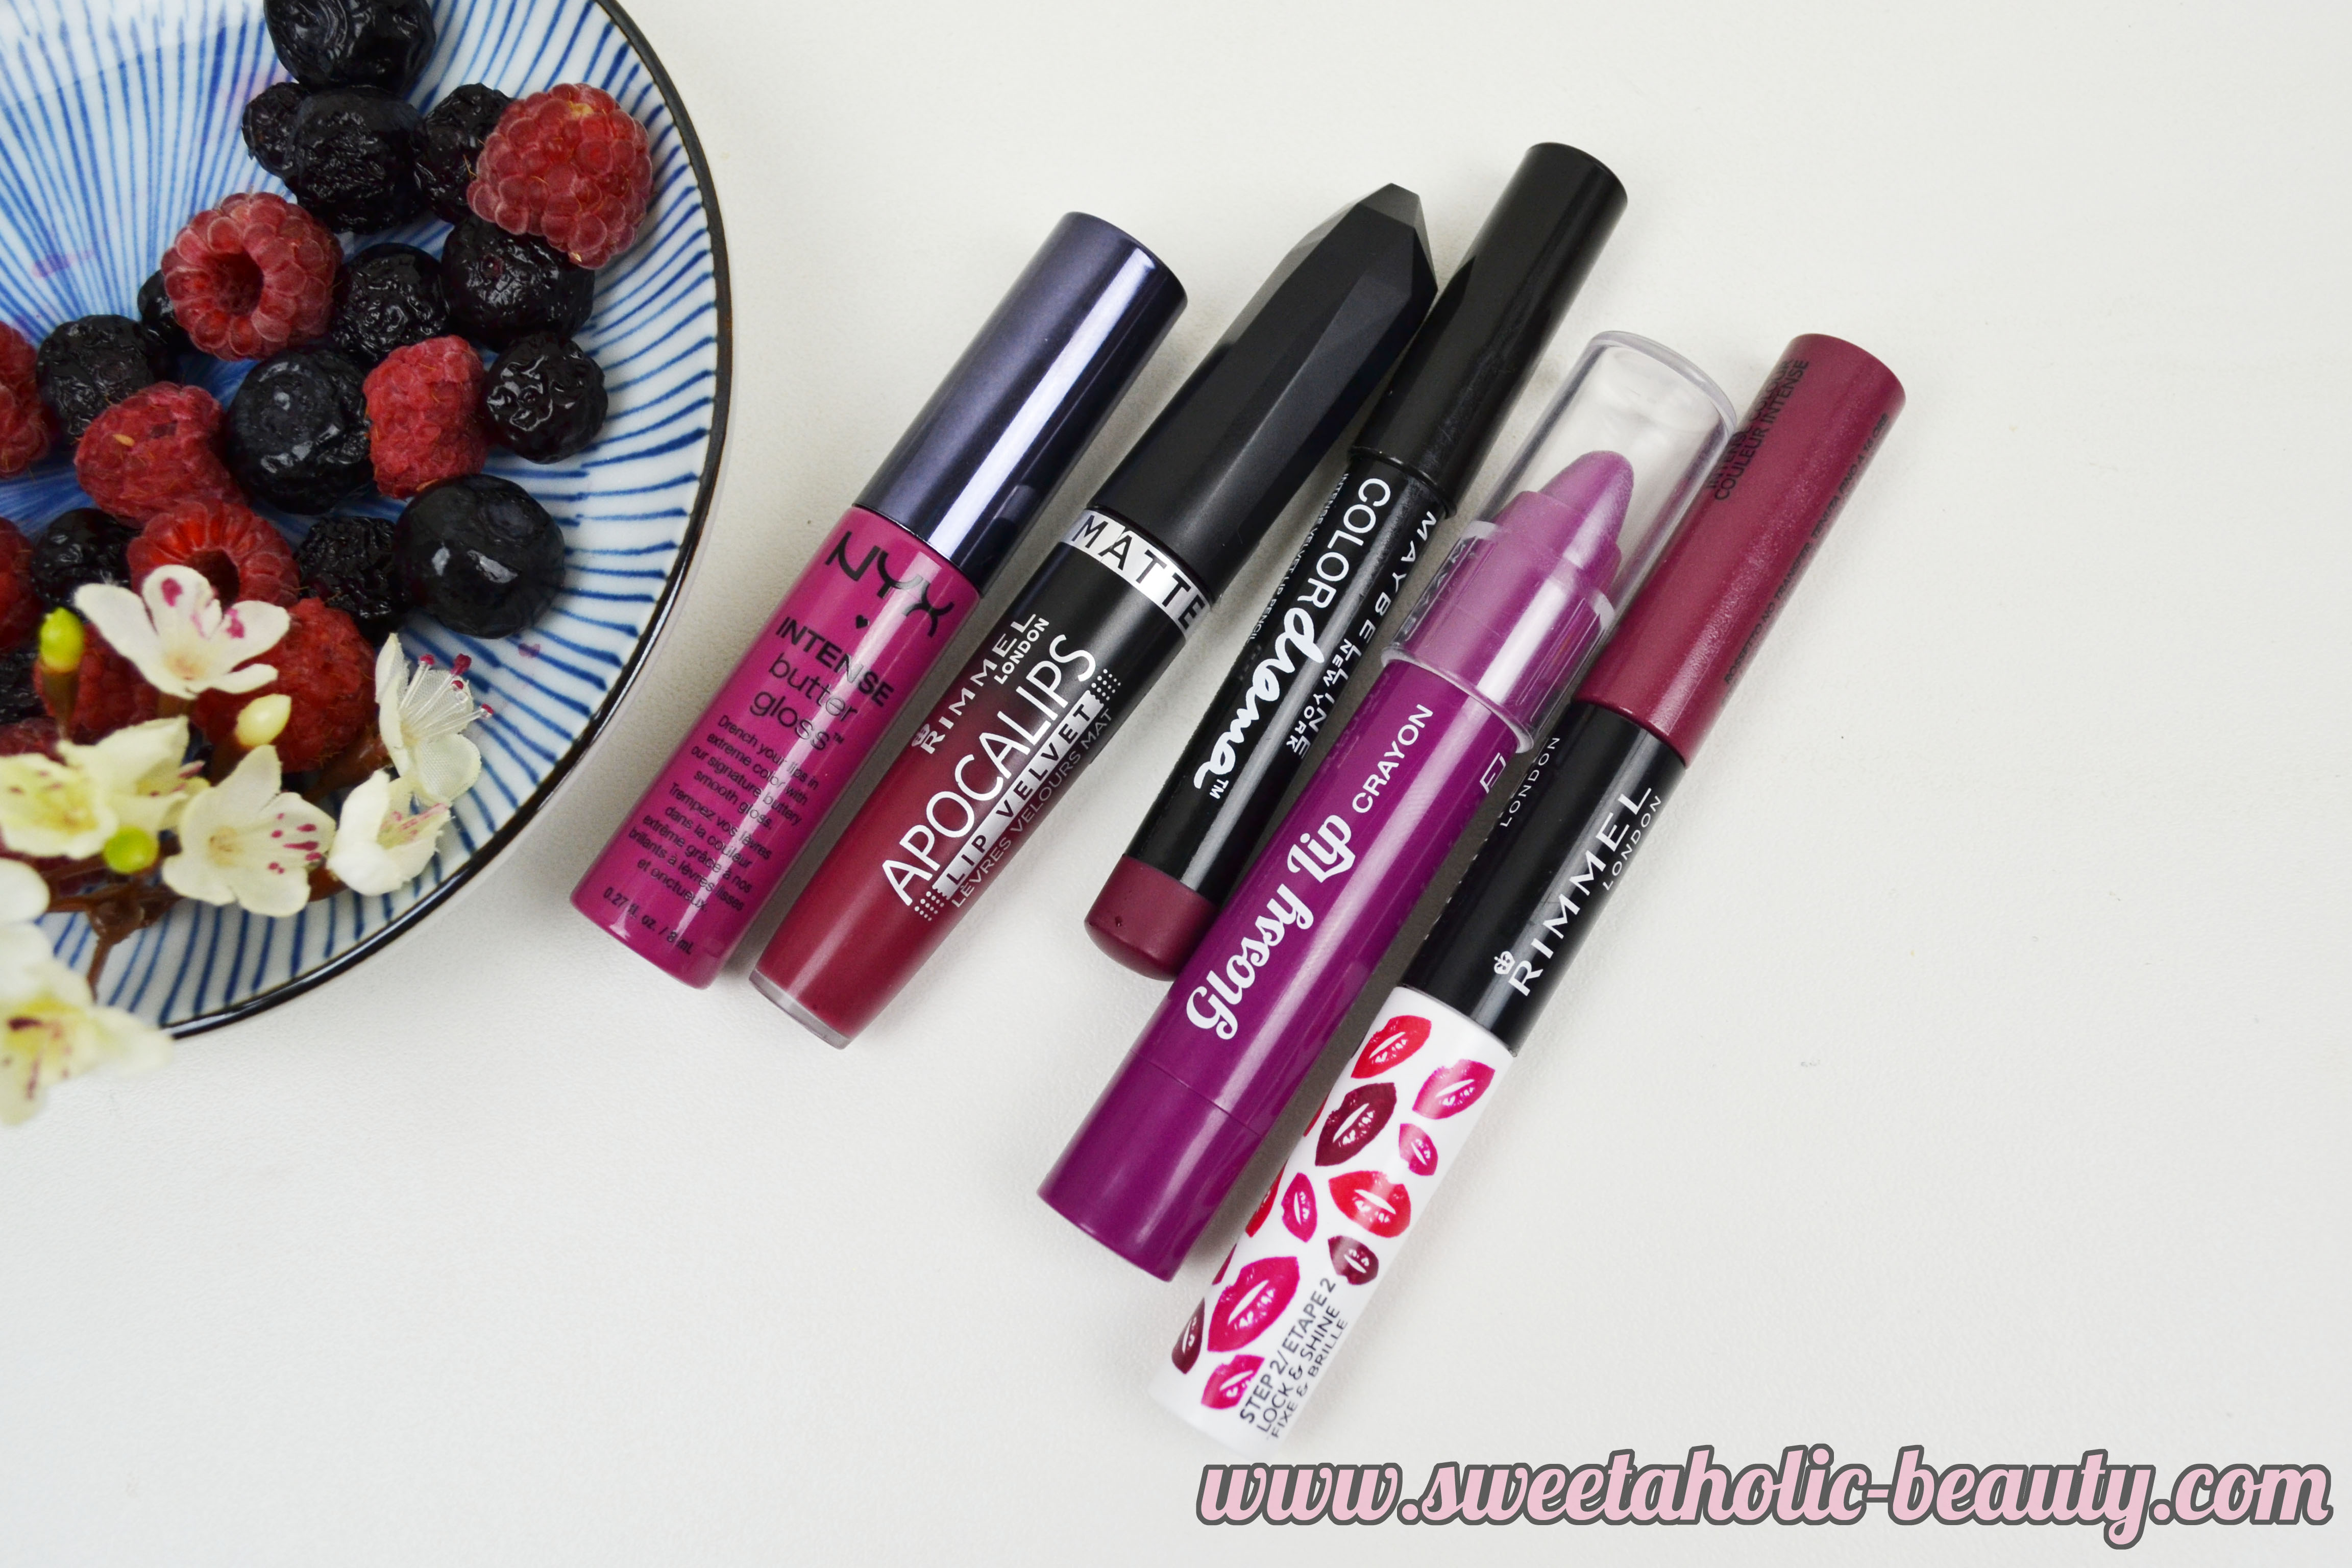 Five Must-Have Berry Shades - Sweetaholic Beauty